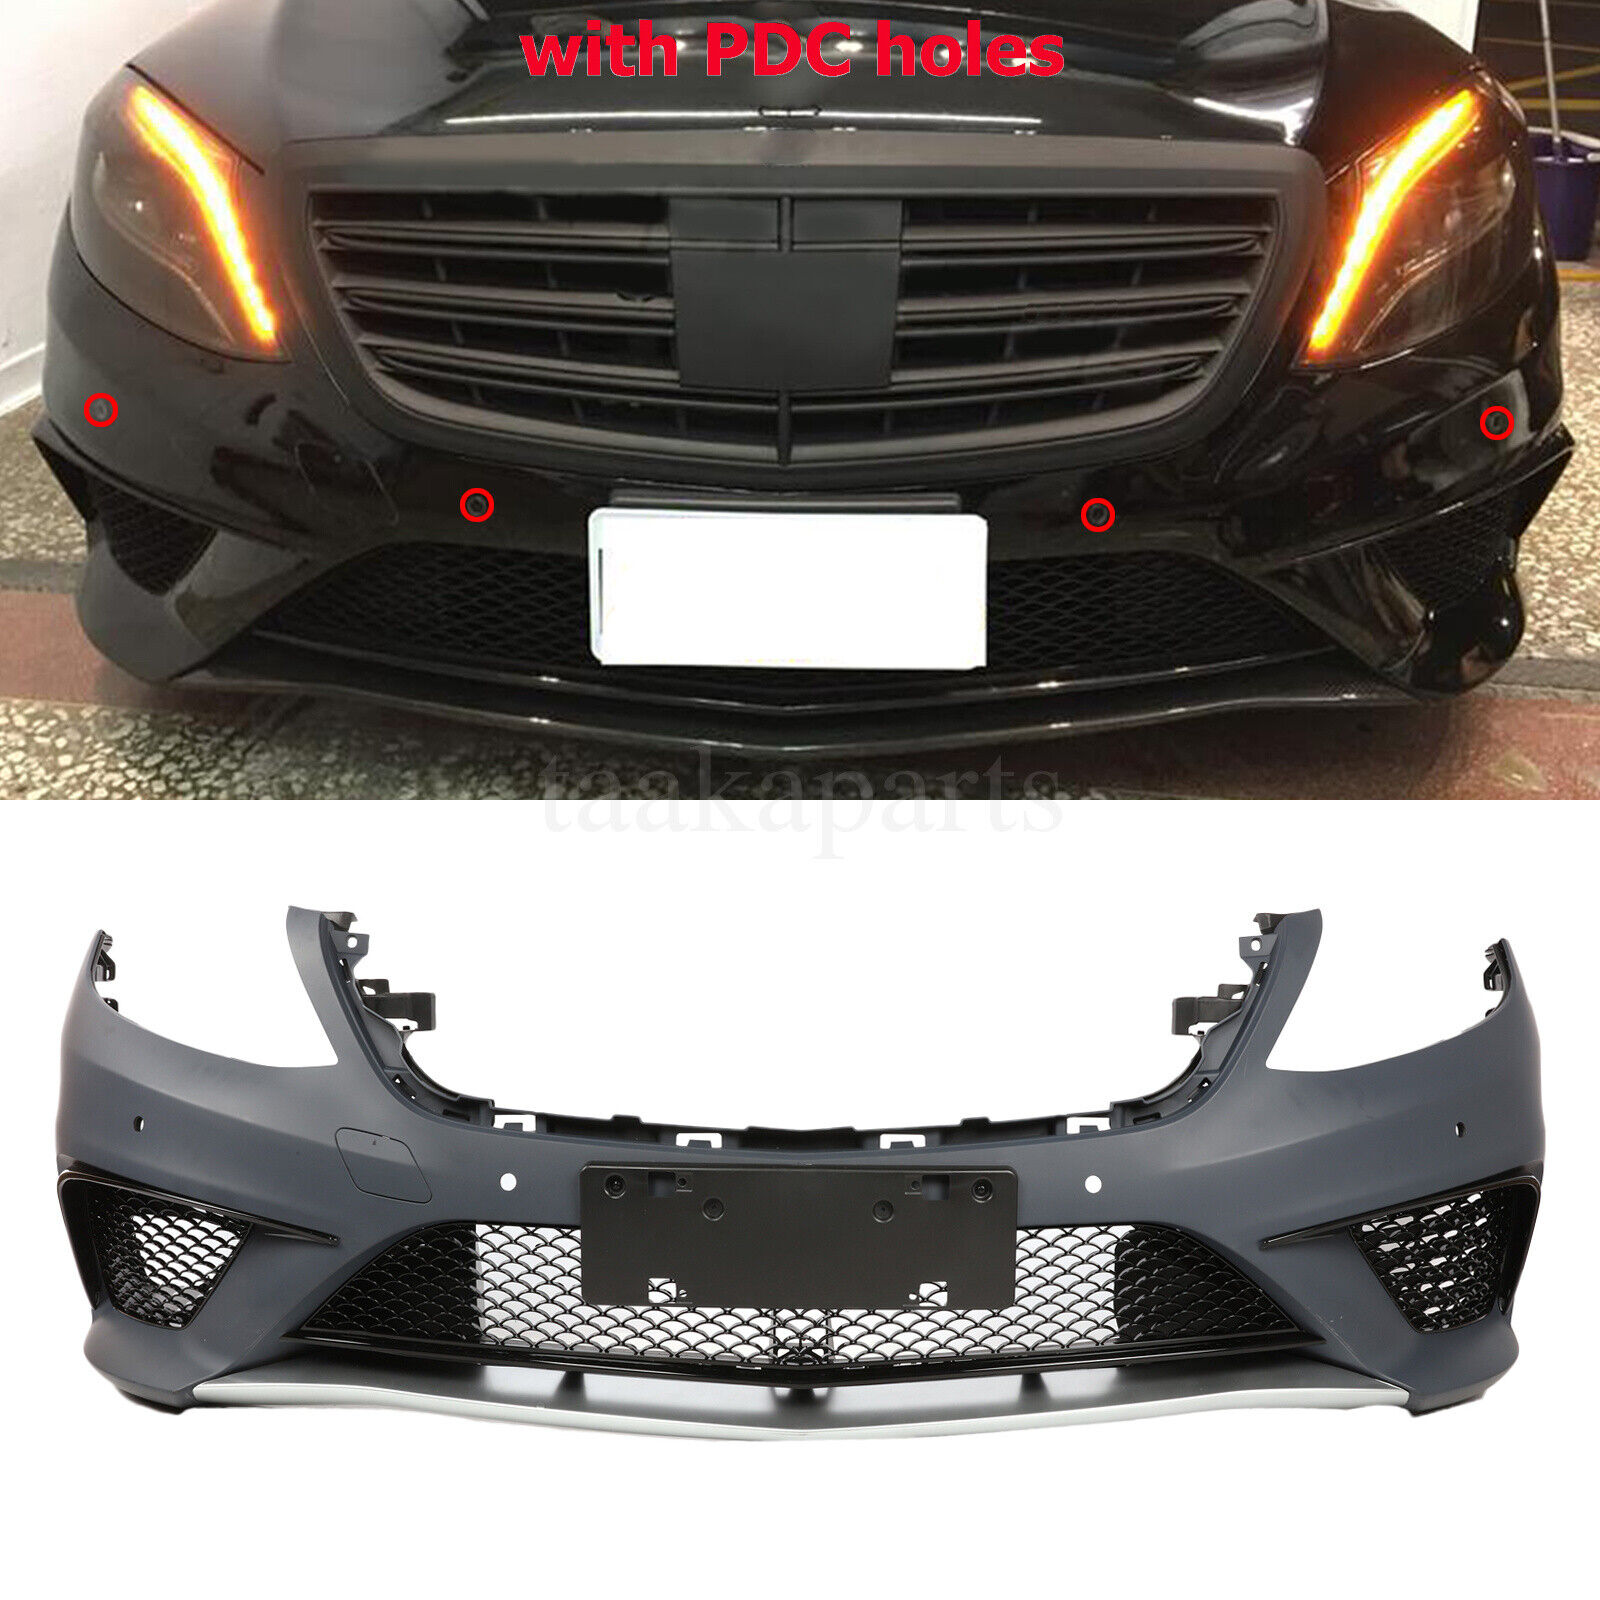 S63 AMG Style Front Bumper Kit W/PDC for Mercedes Benz S-Class W222 2014-2017